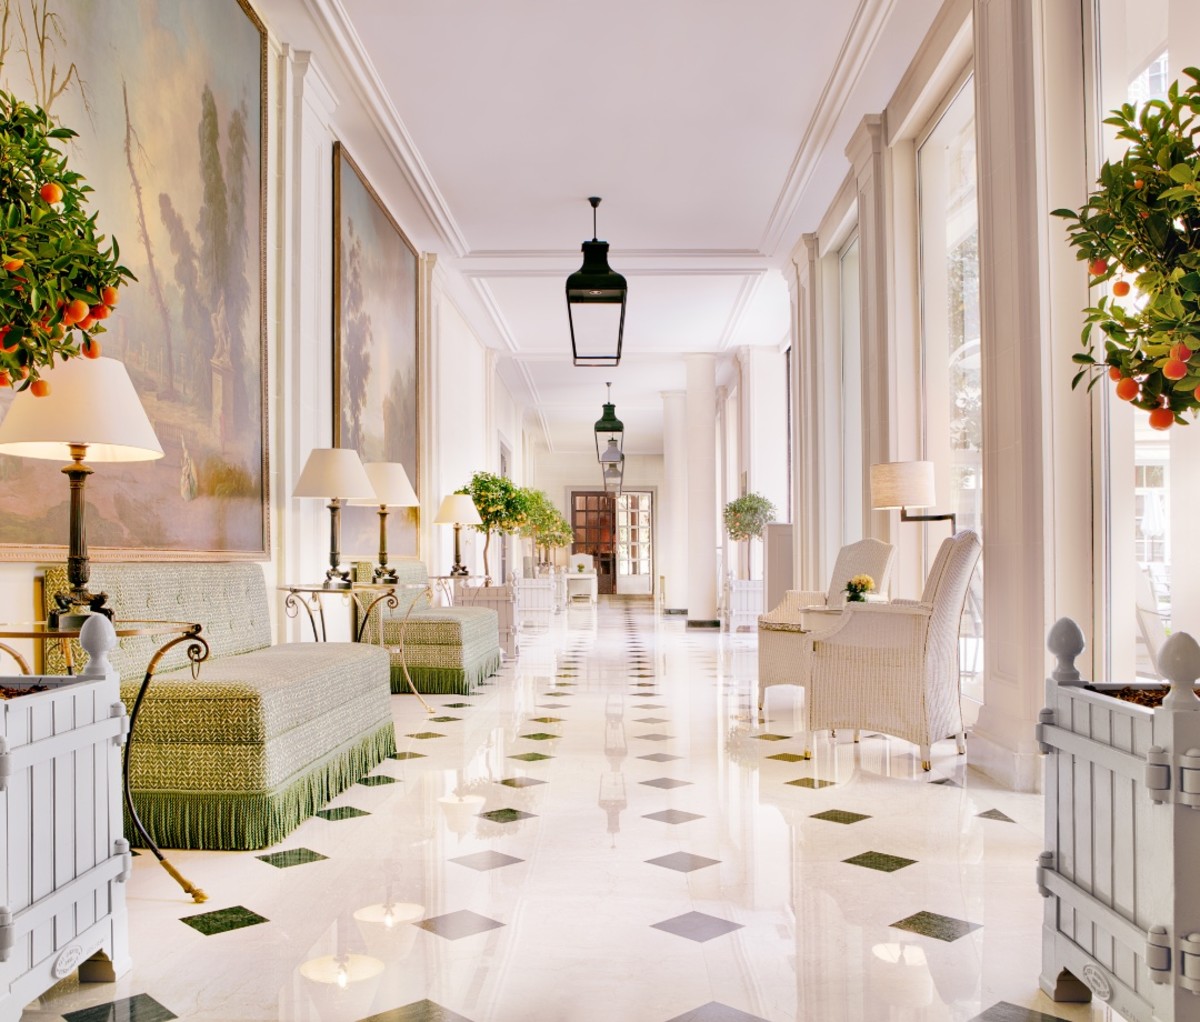 Visit one of these luxury hotels from around the world for fantastic, pampered experience.